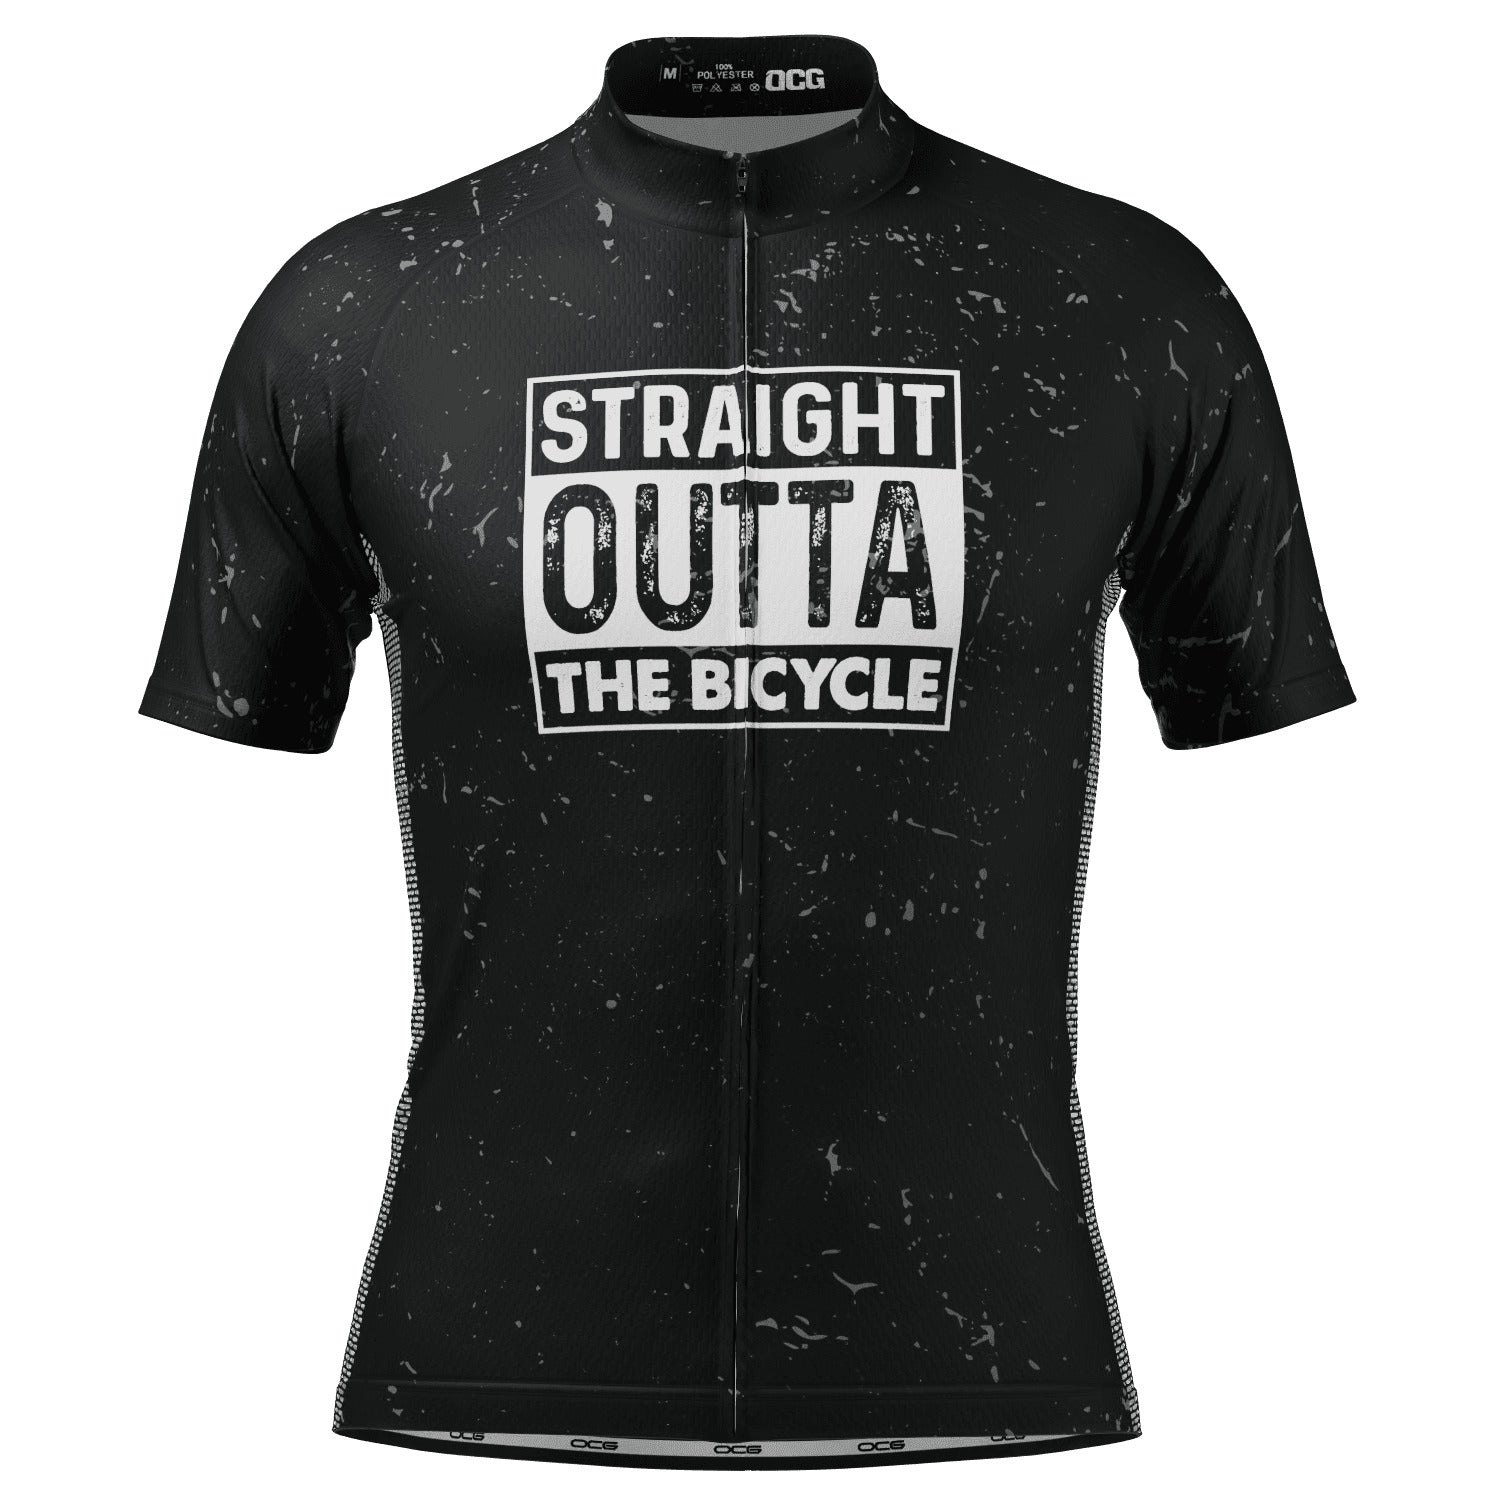 Men's Straight Outta The Bicycle Short Sleeve Cycling Jersey